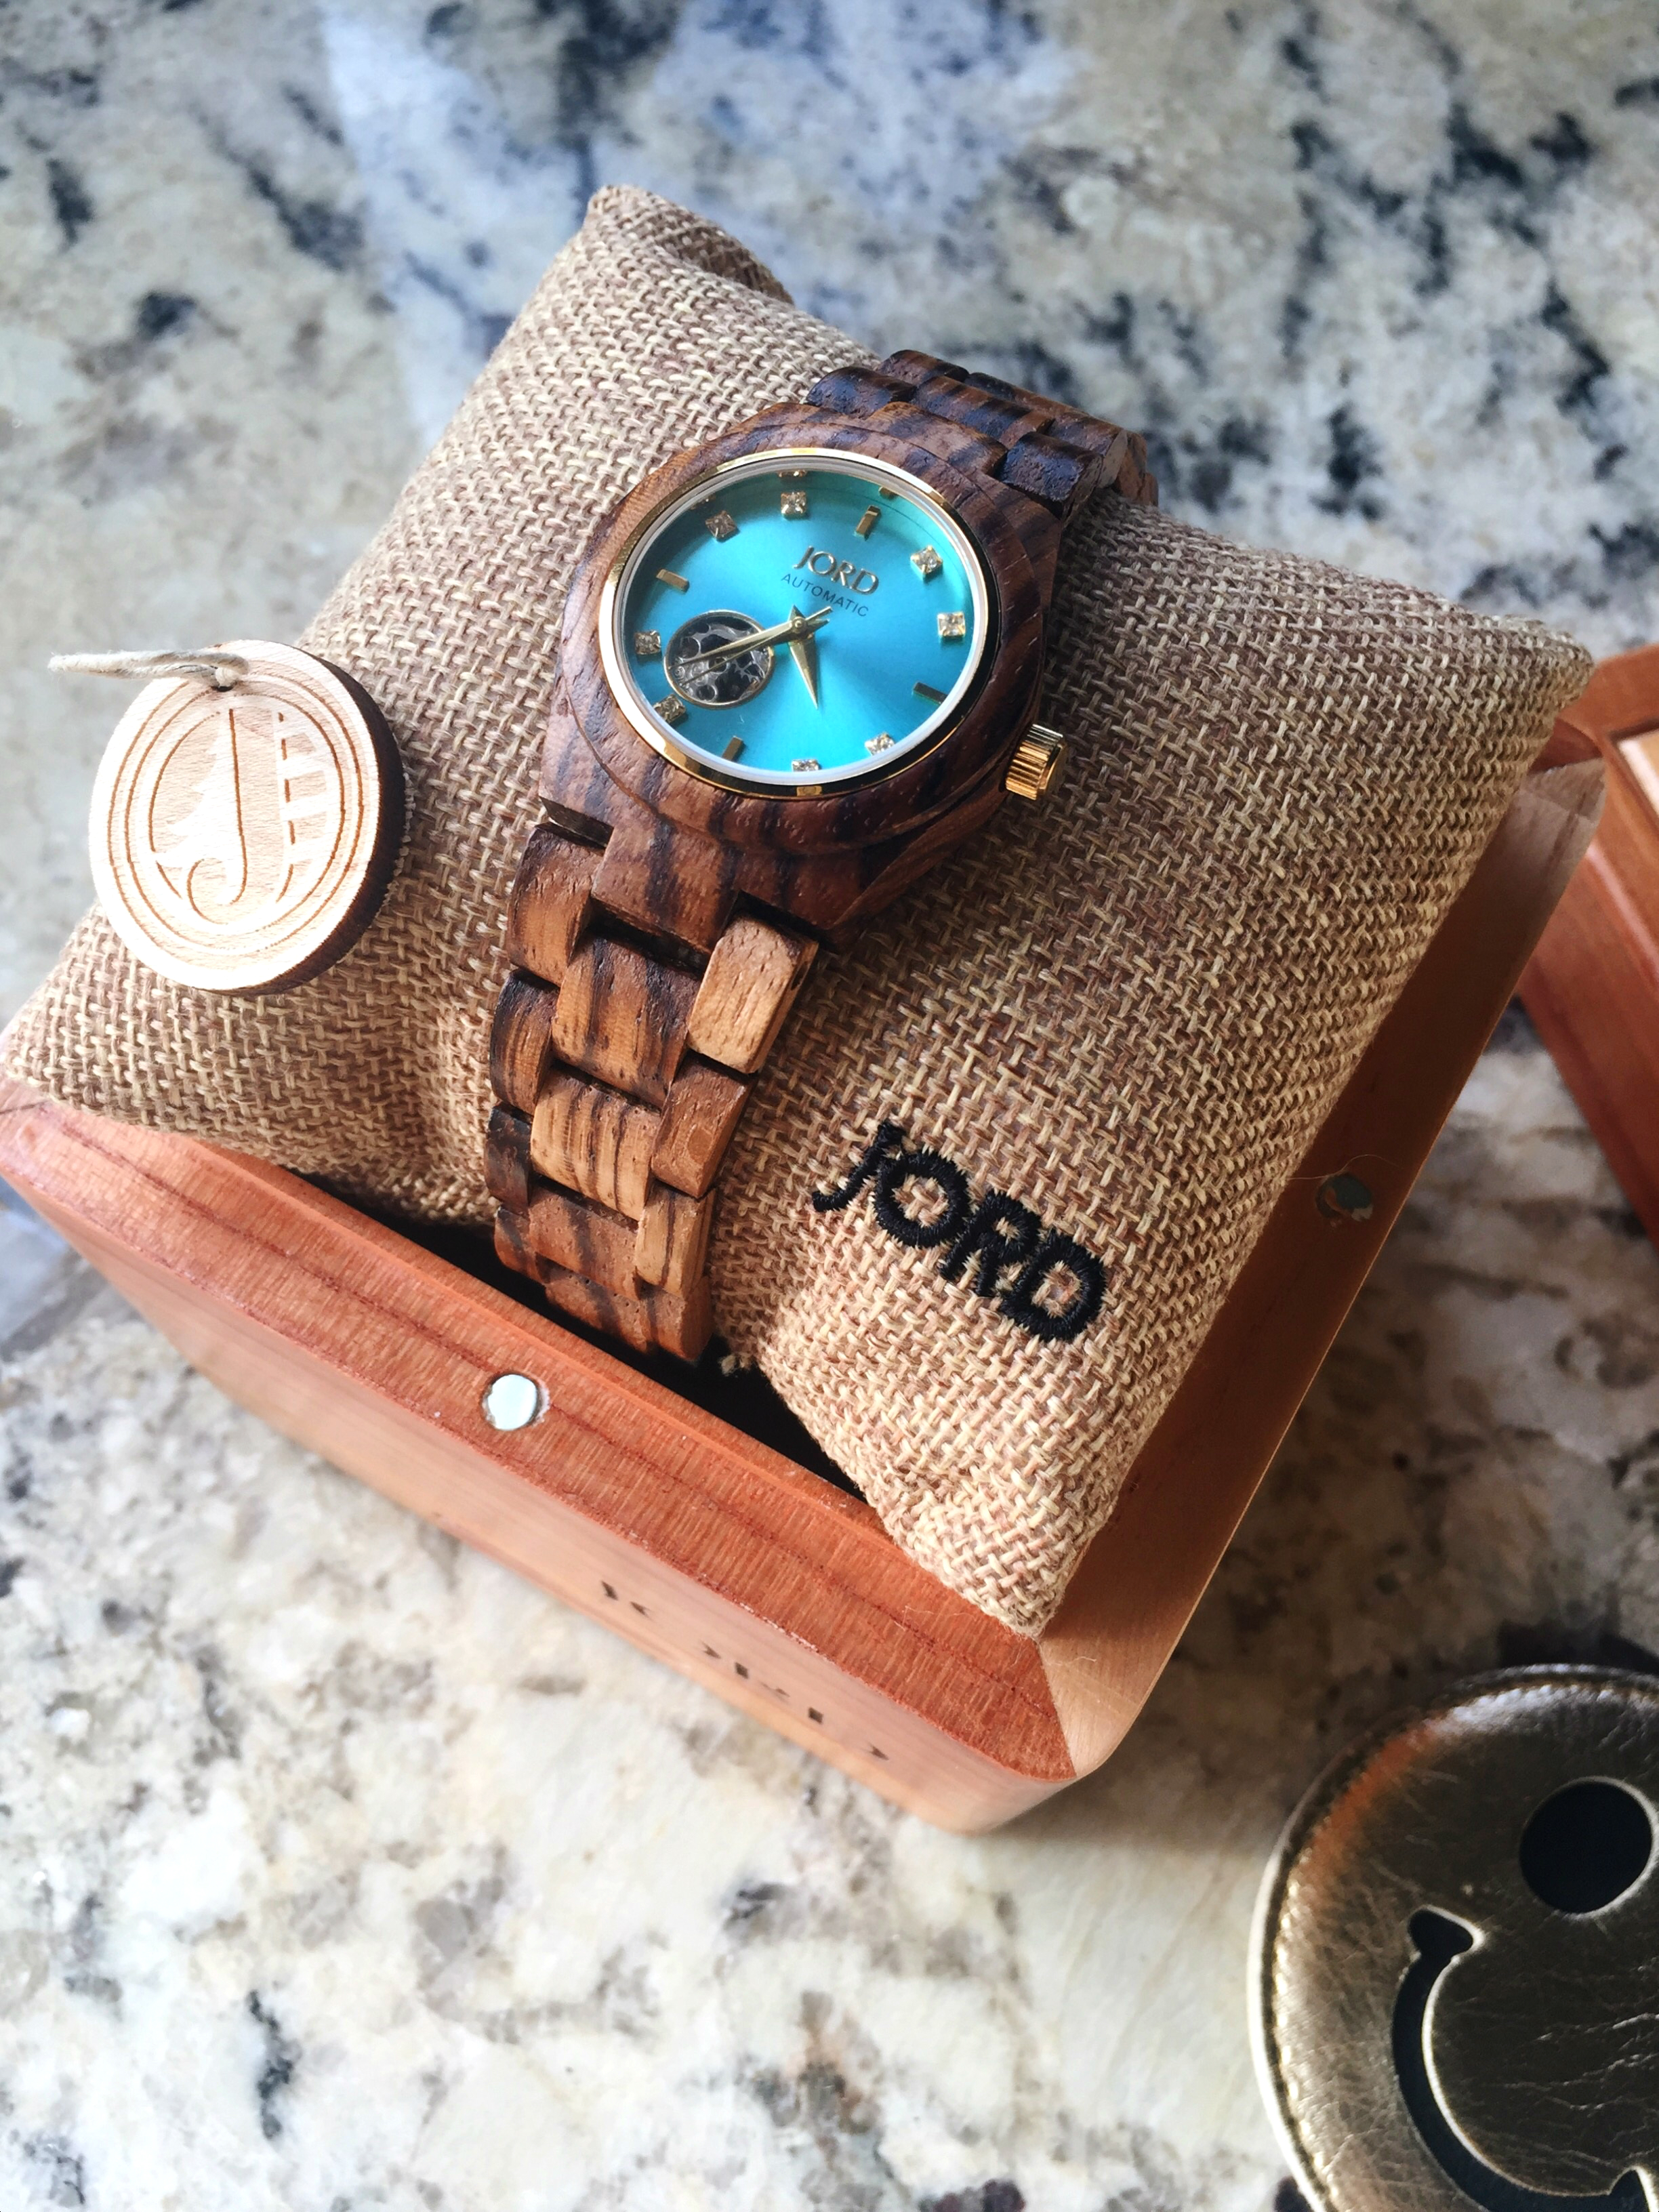 jord watches, jord cora watch, zebrawood watch, turquoise face watch, gorgeous watches, cute watches, summer watch styles